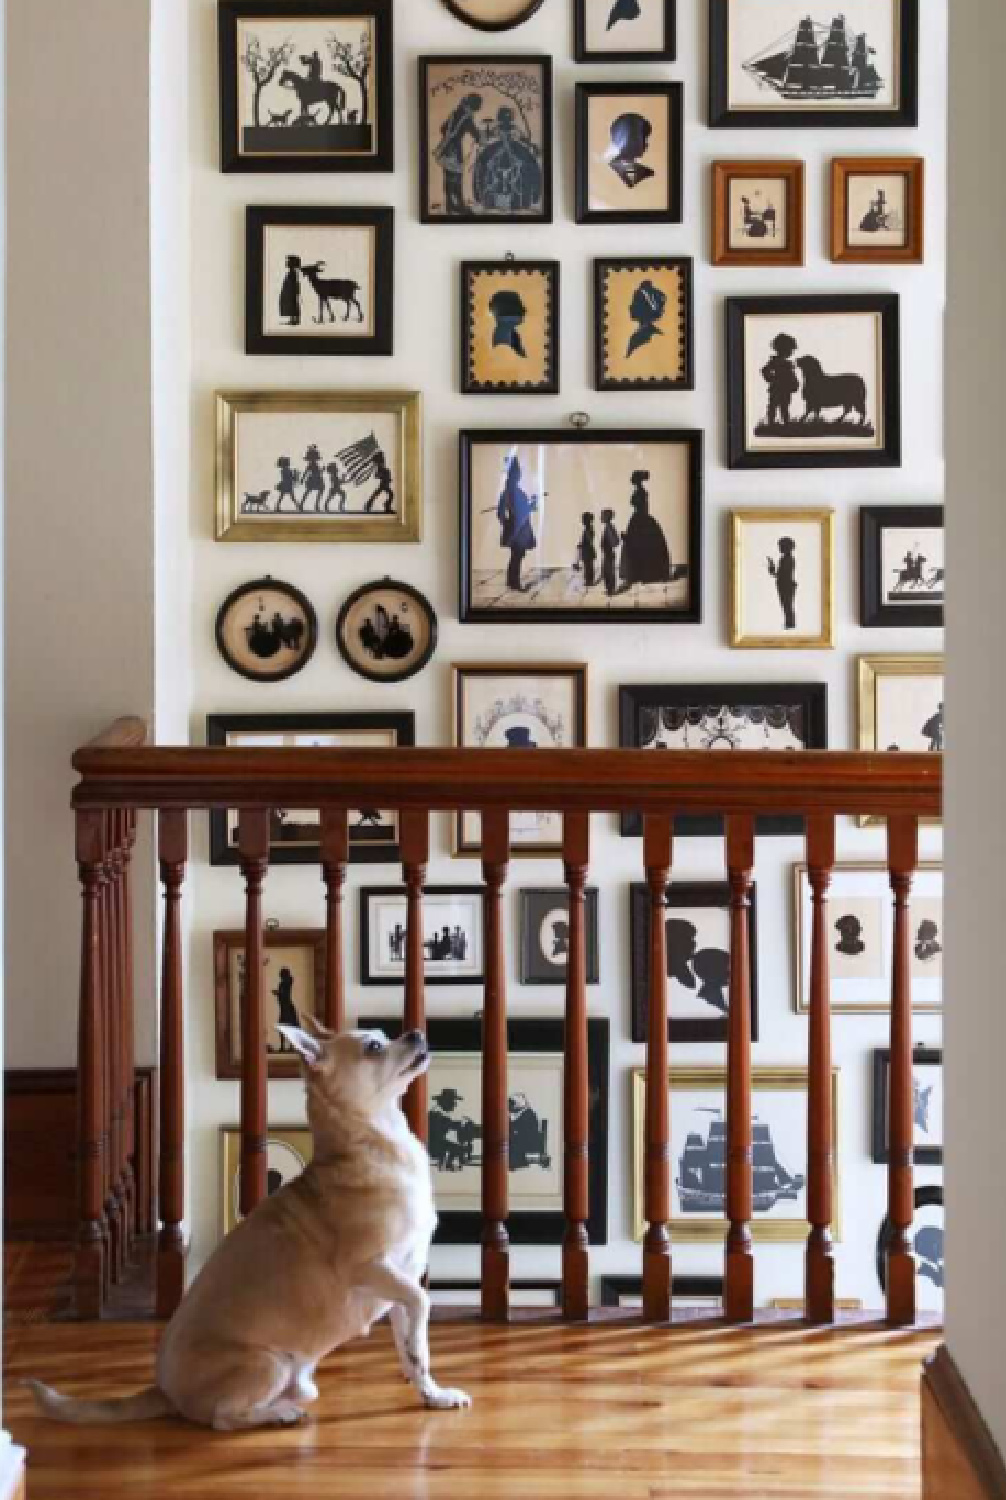 A gallery of framed silhouettes on a stairway wall in a country house - Nora Murphy.